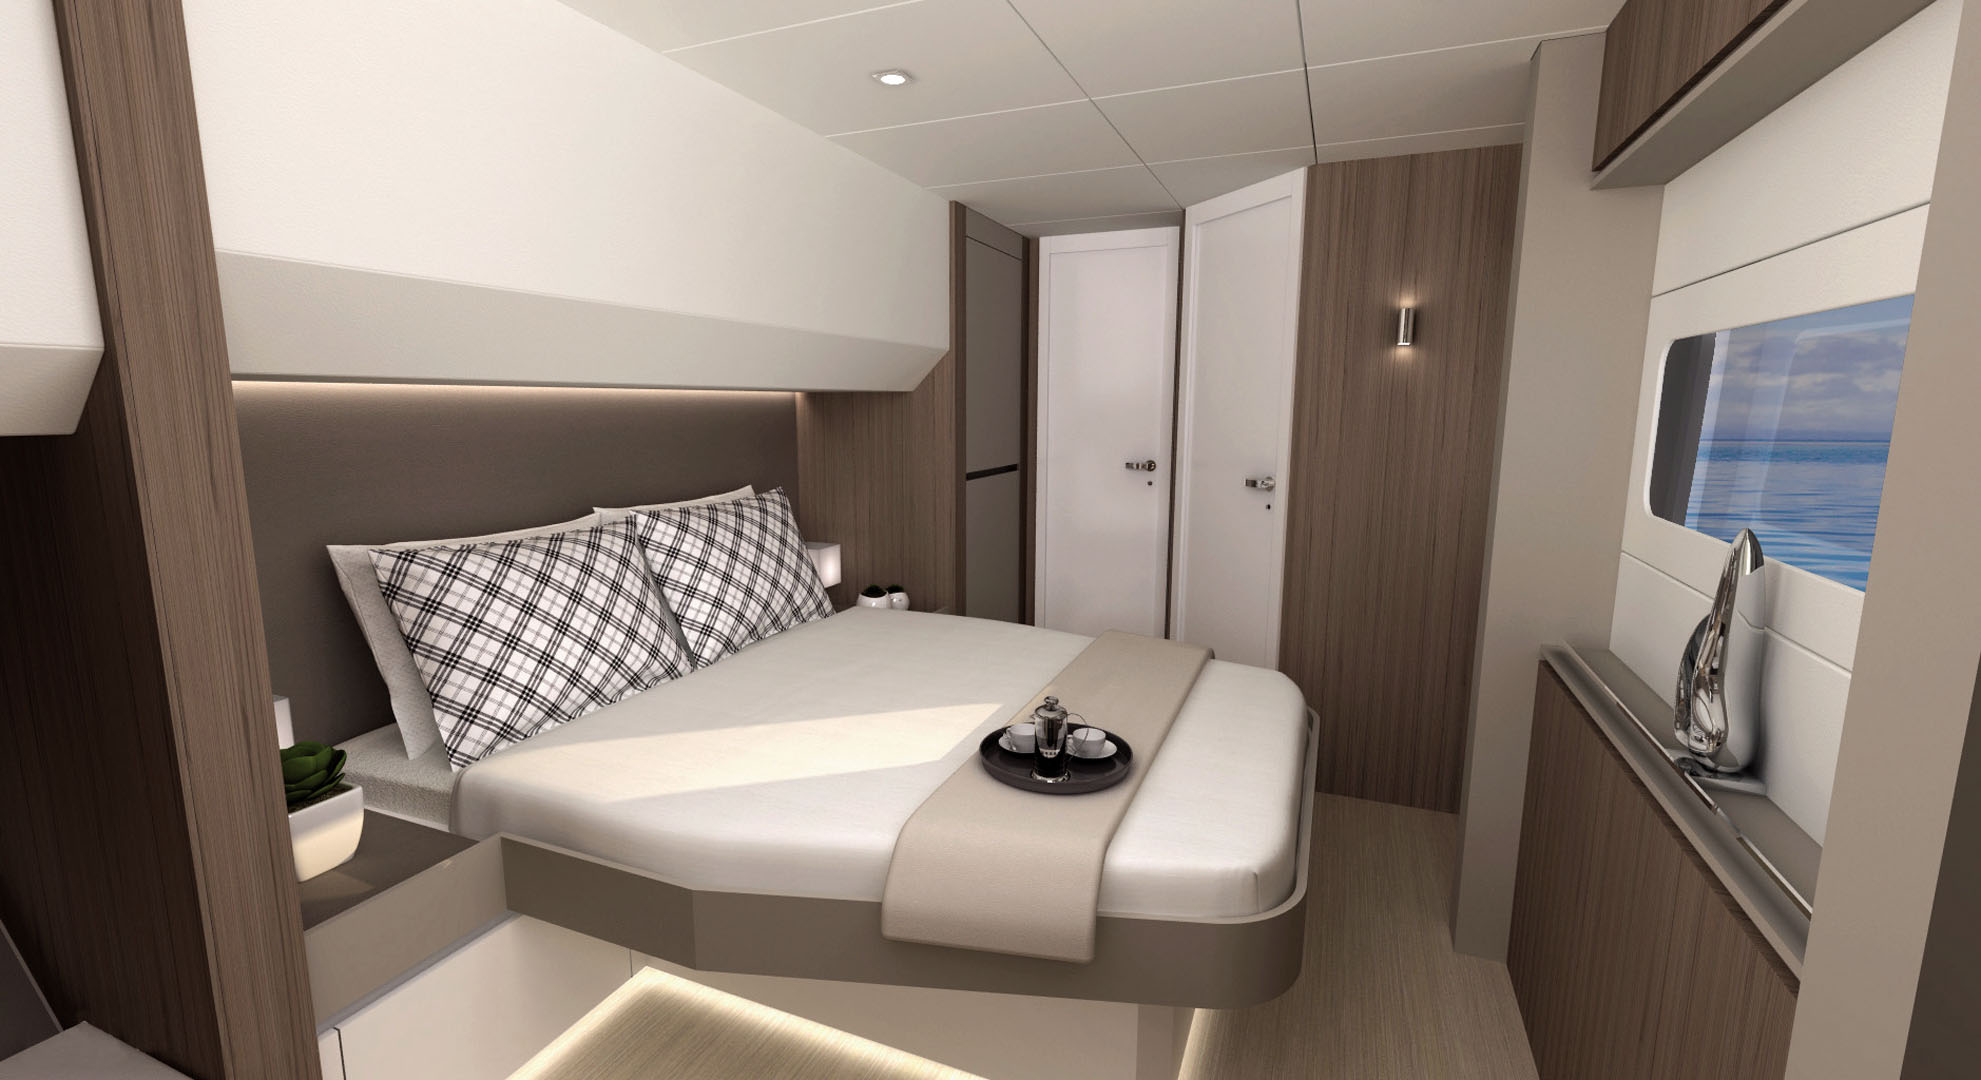 Catamaran BALI 4.8 - pictures, plans and features